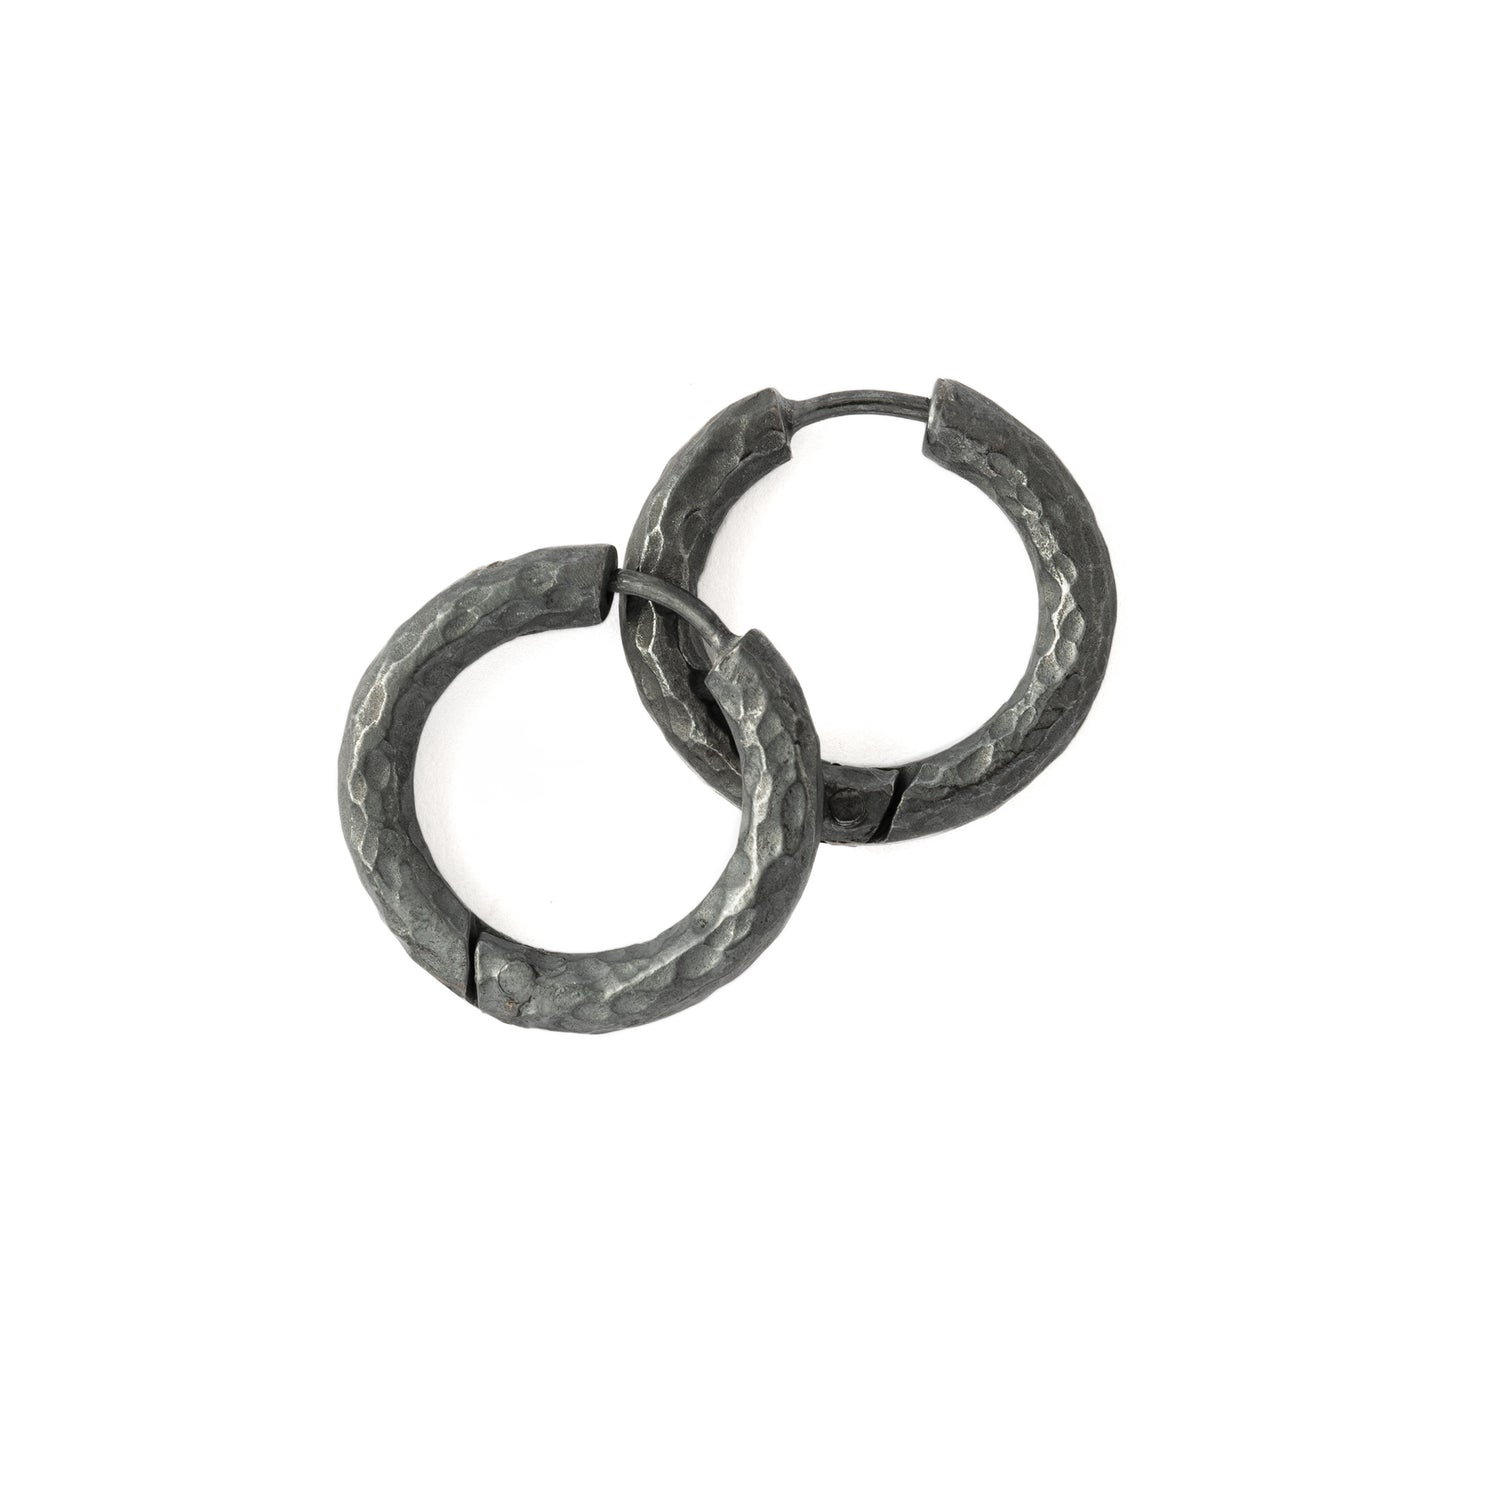 Pair of 22mm Hammered Black Silver Clicker Hoops